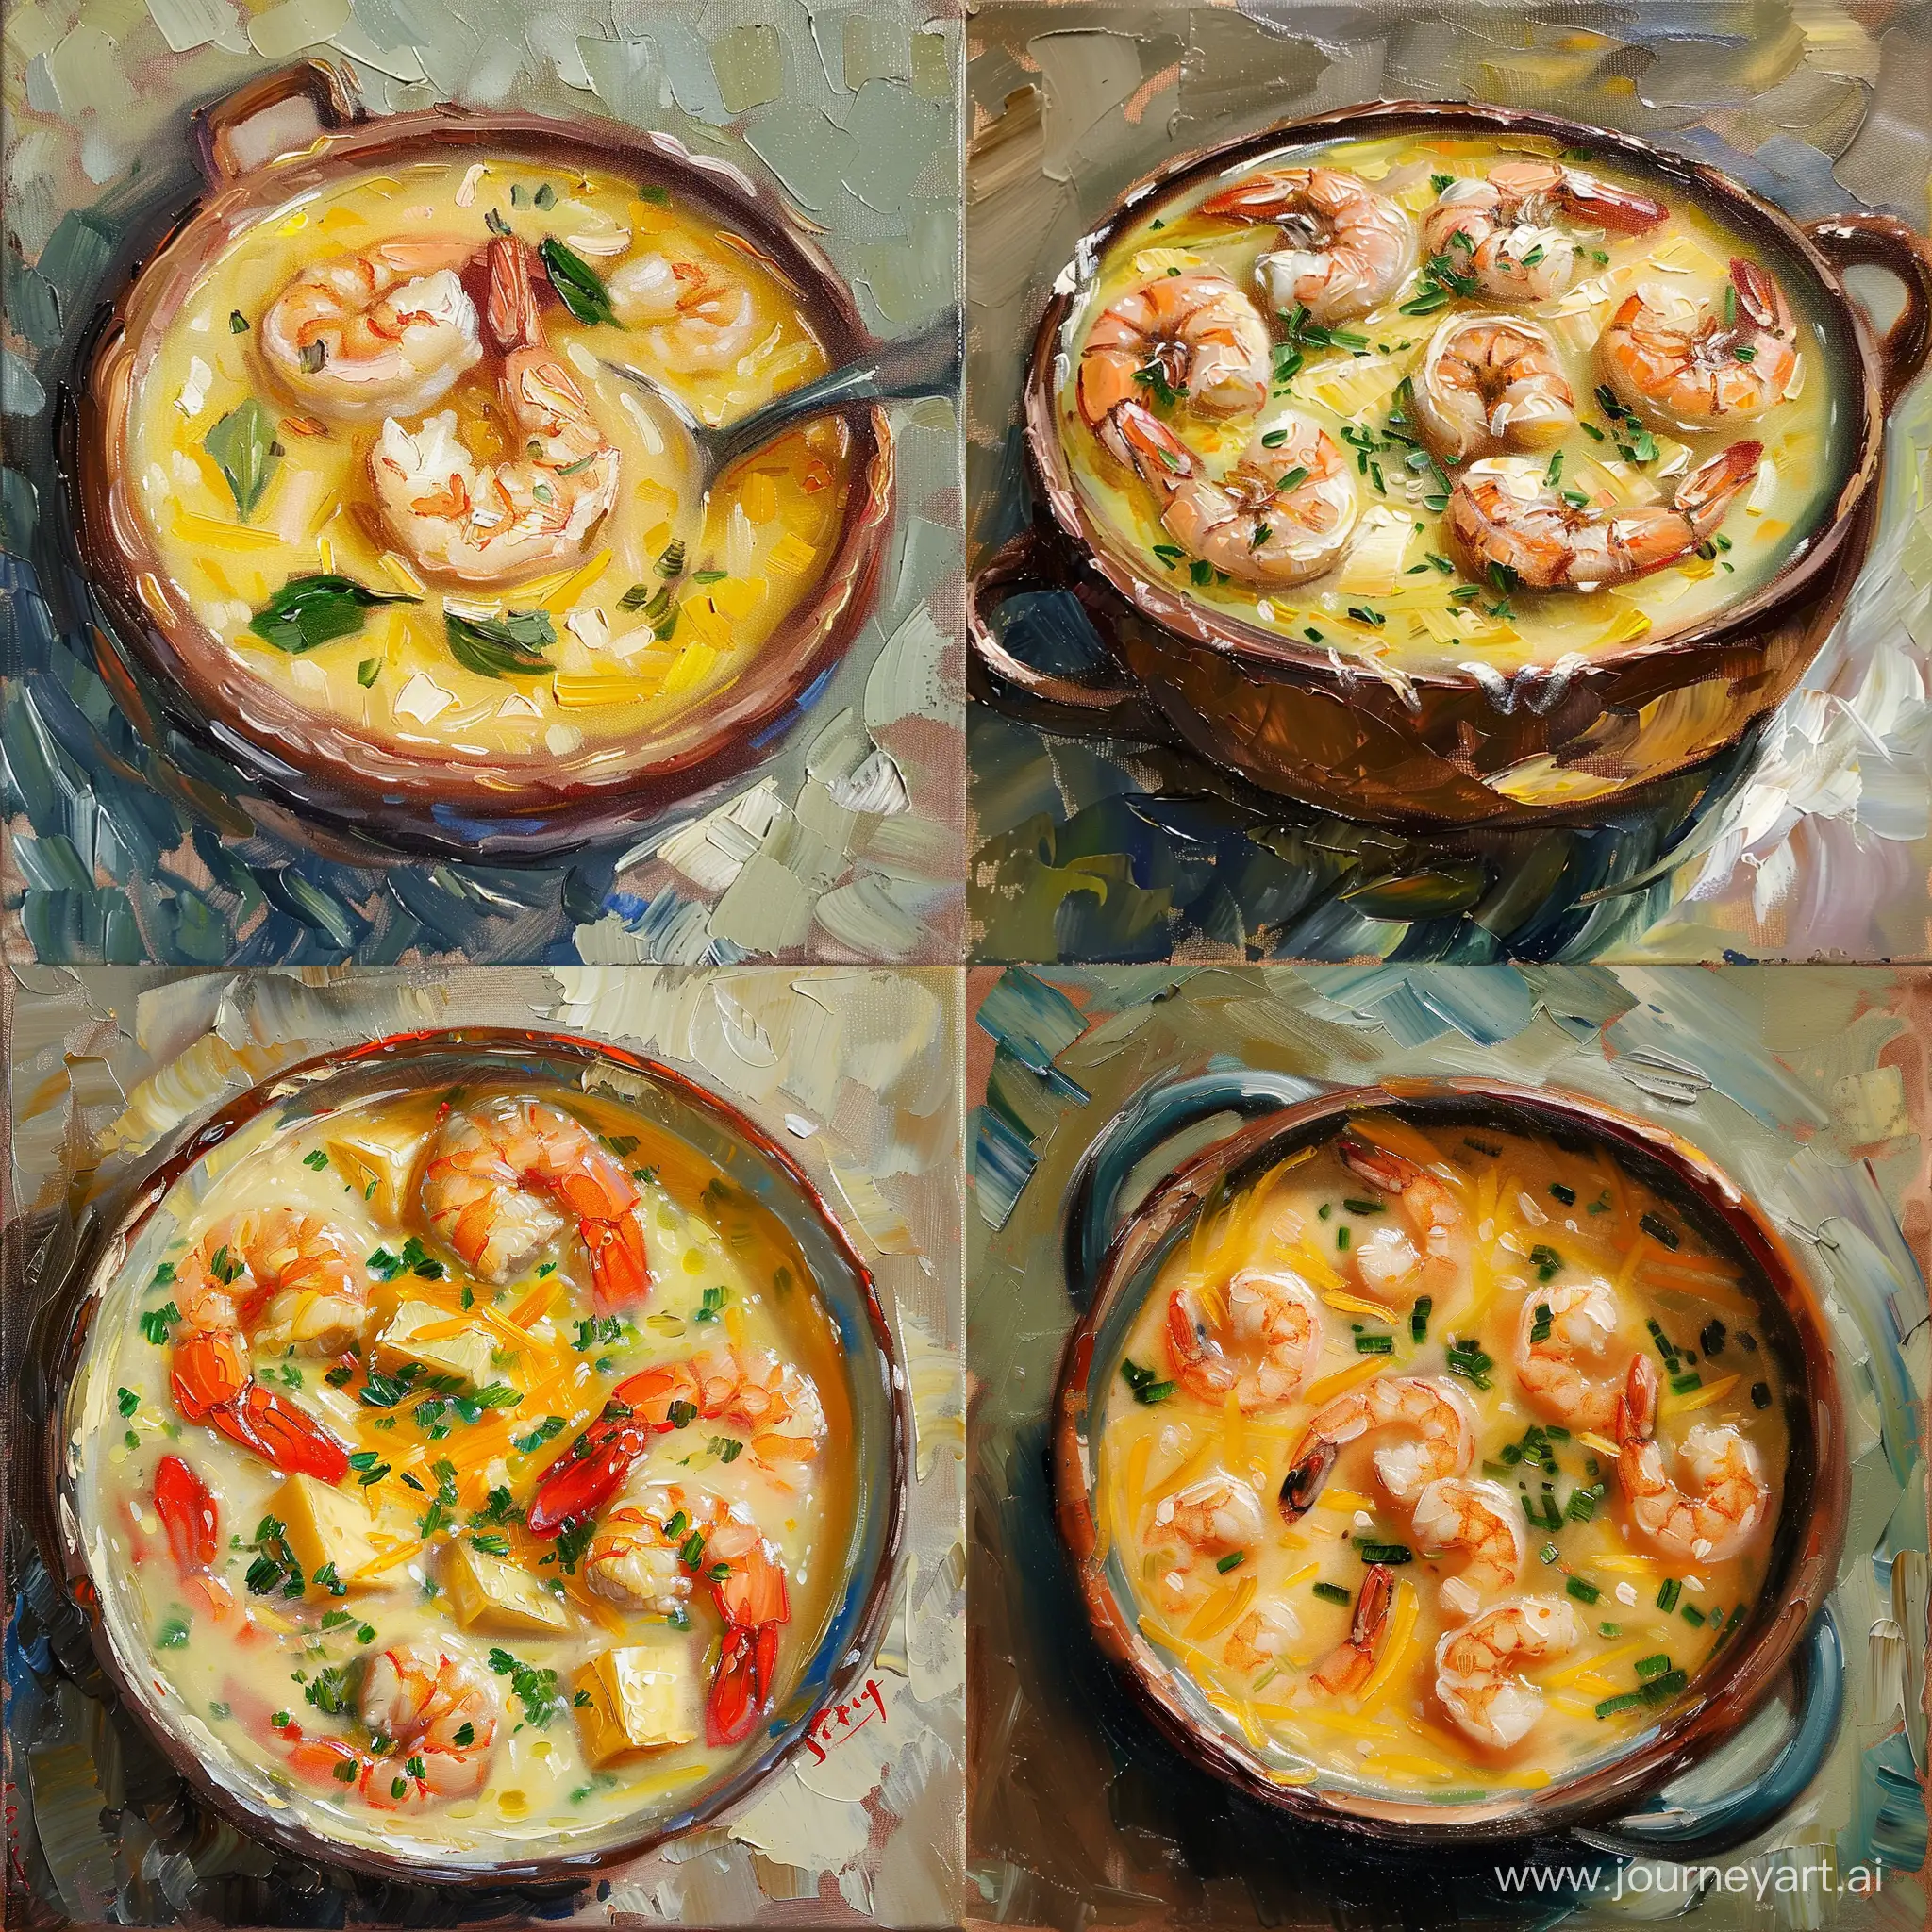 Savory-Cheese-Soup-with-Succulent-Shrimp-Artistic-Oil-Painting